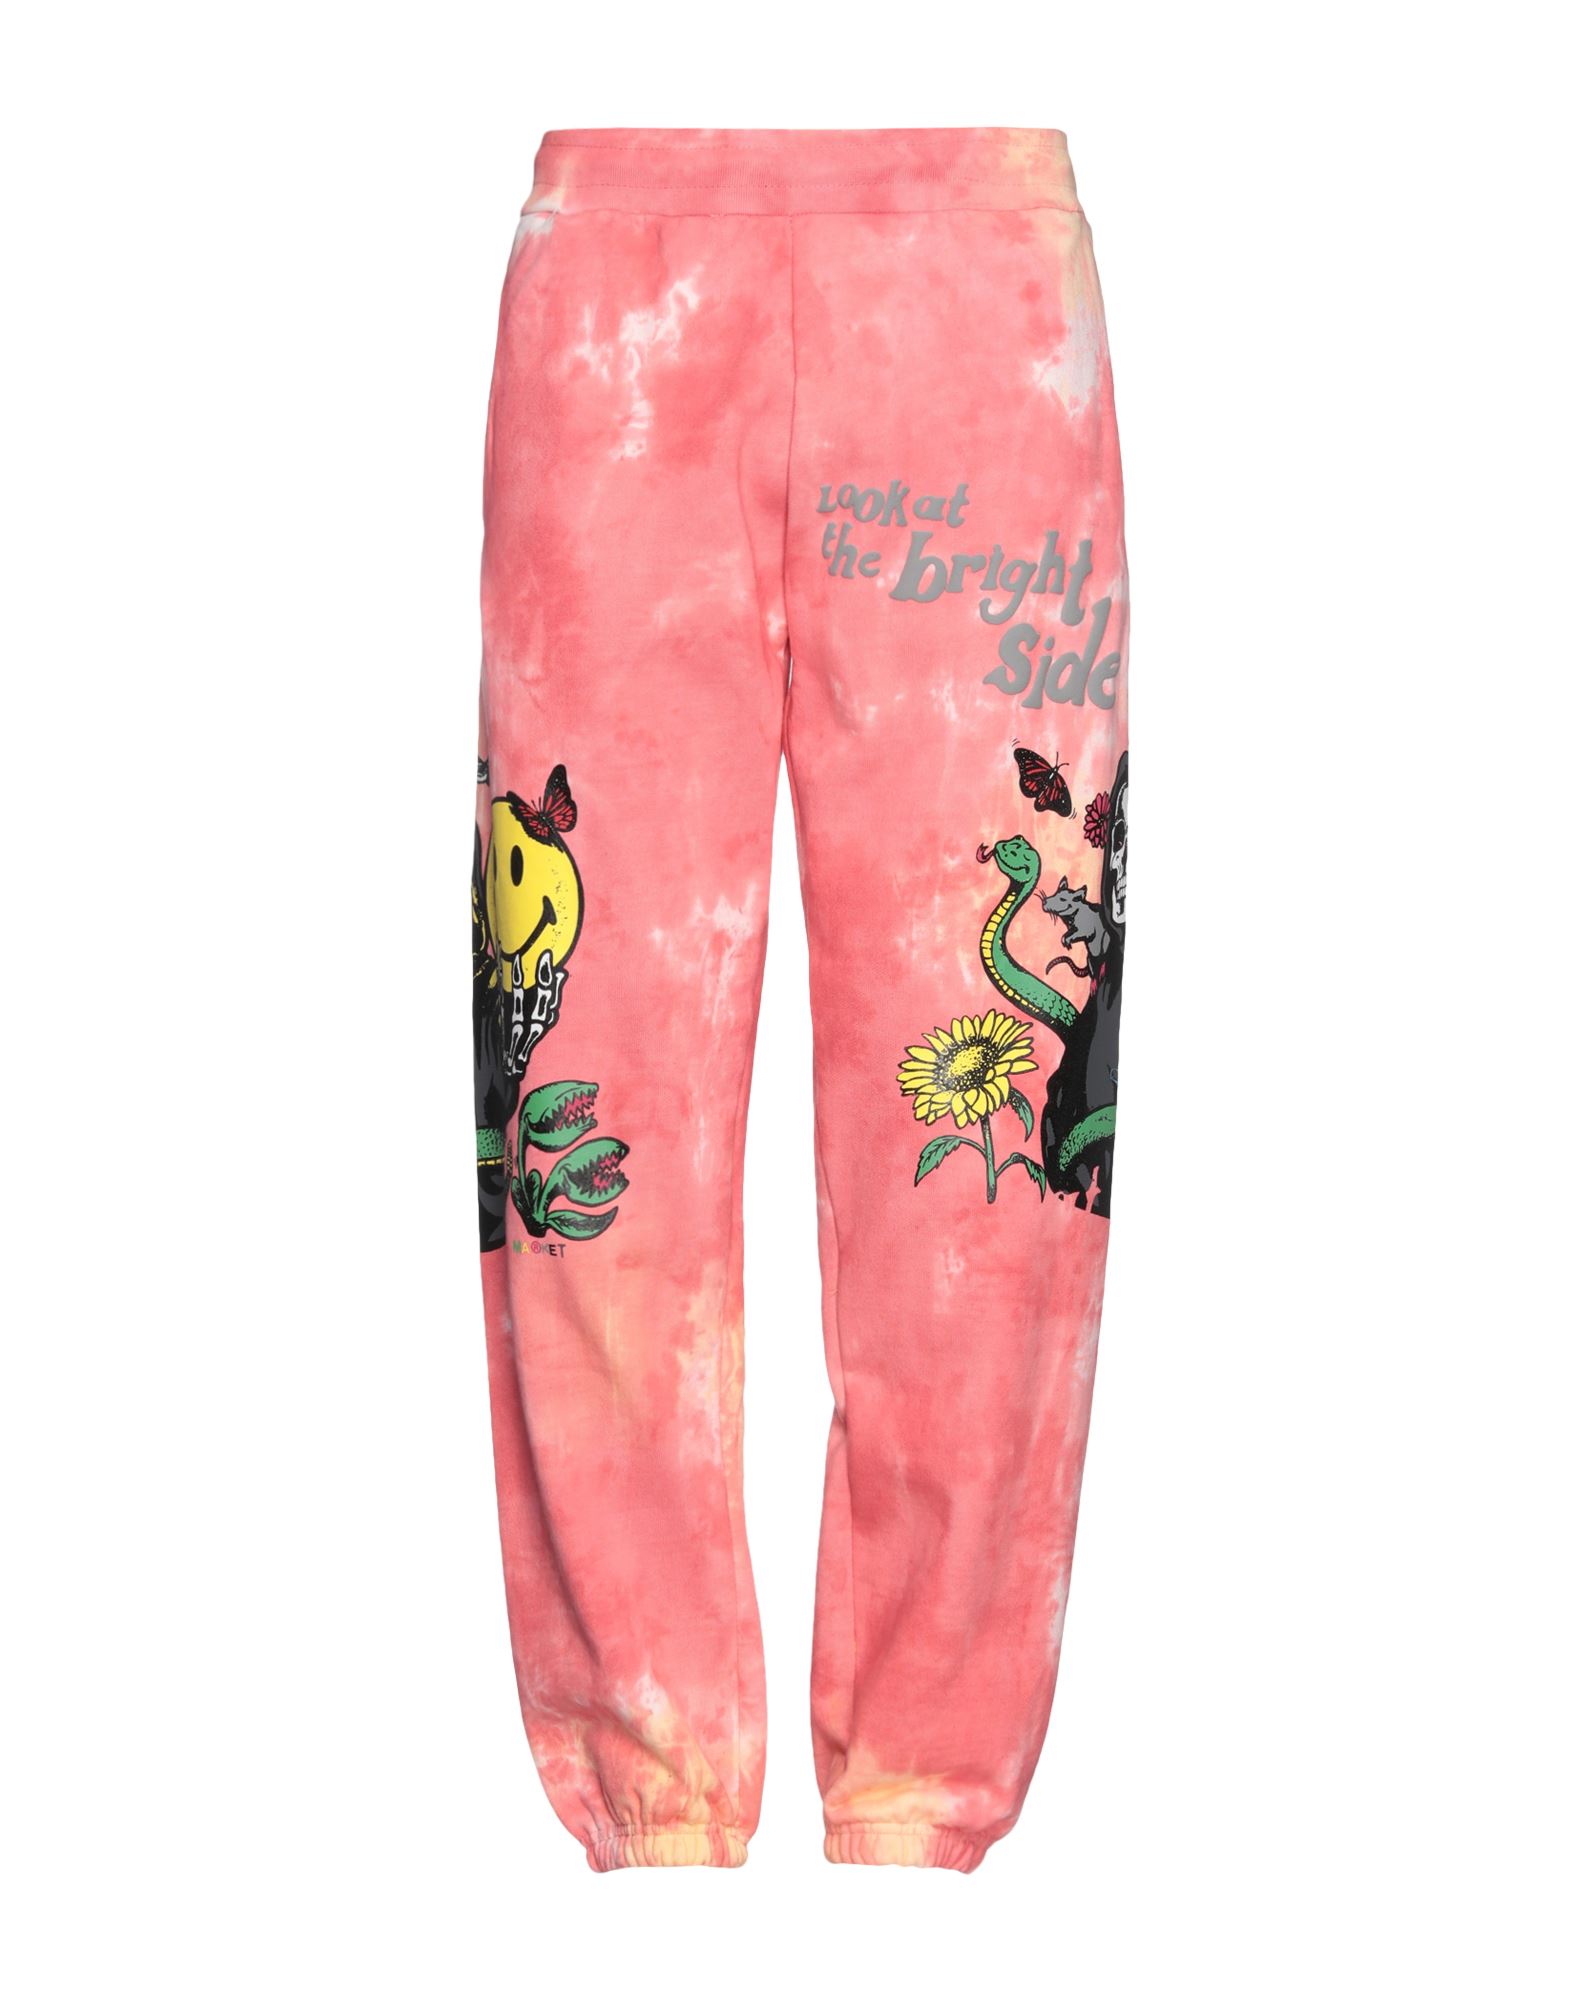 MARKET Y pc SMILEY LOOK AT THE BRIGHT SIDE PINK TIE-DYE SWEATPANTS sN